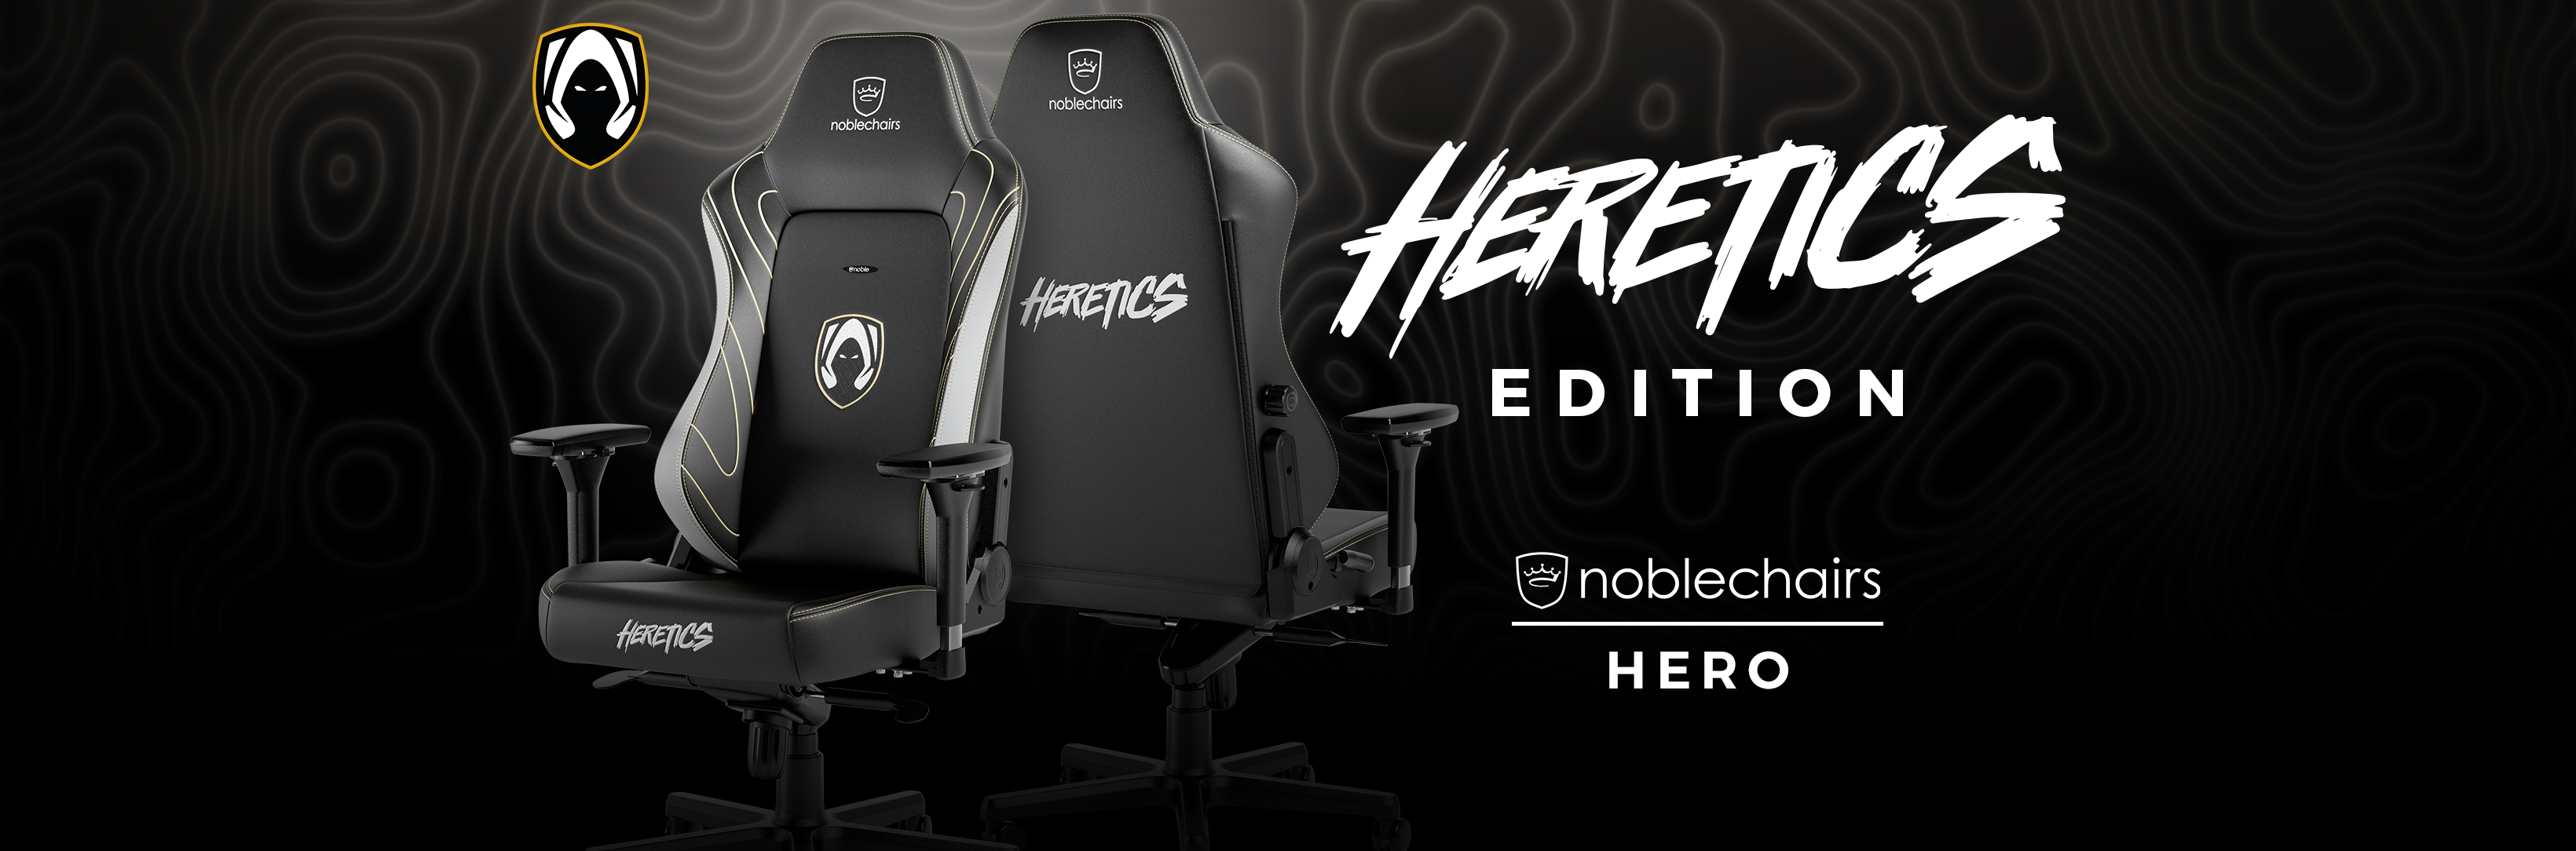 noblechairs Heretics Edition